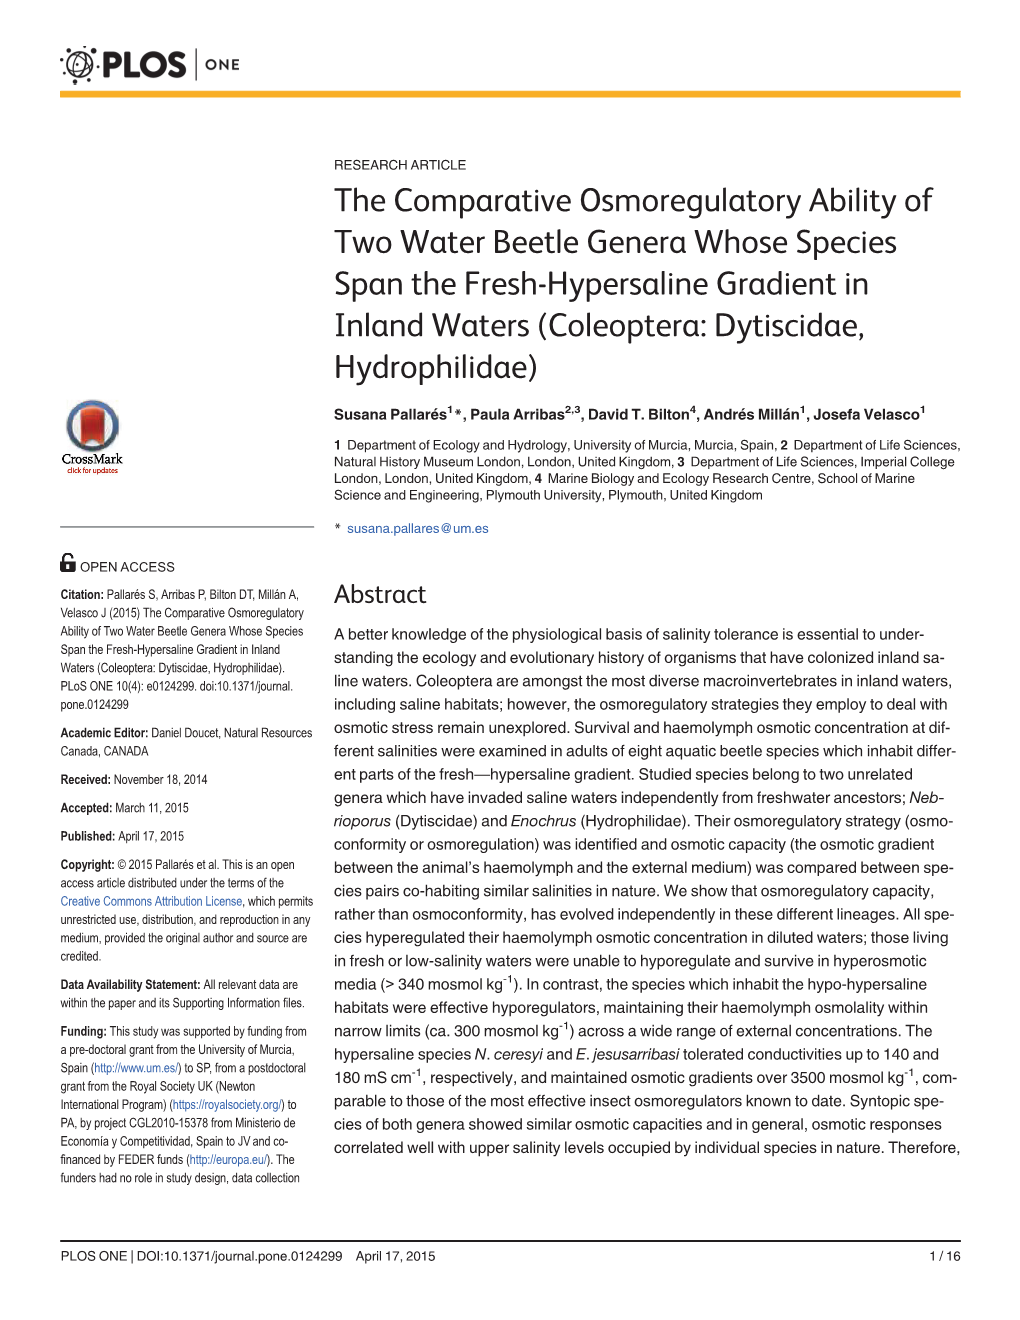 The Comparative Osmoregulatory Ability of Two Water Beetle Genera